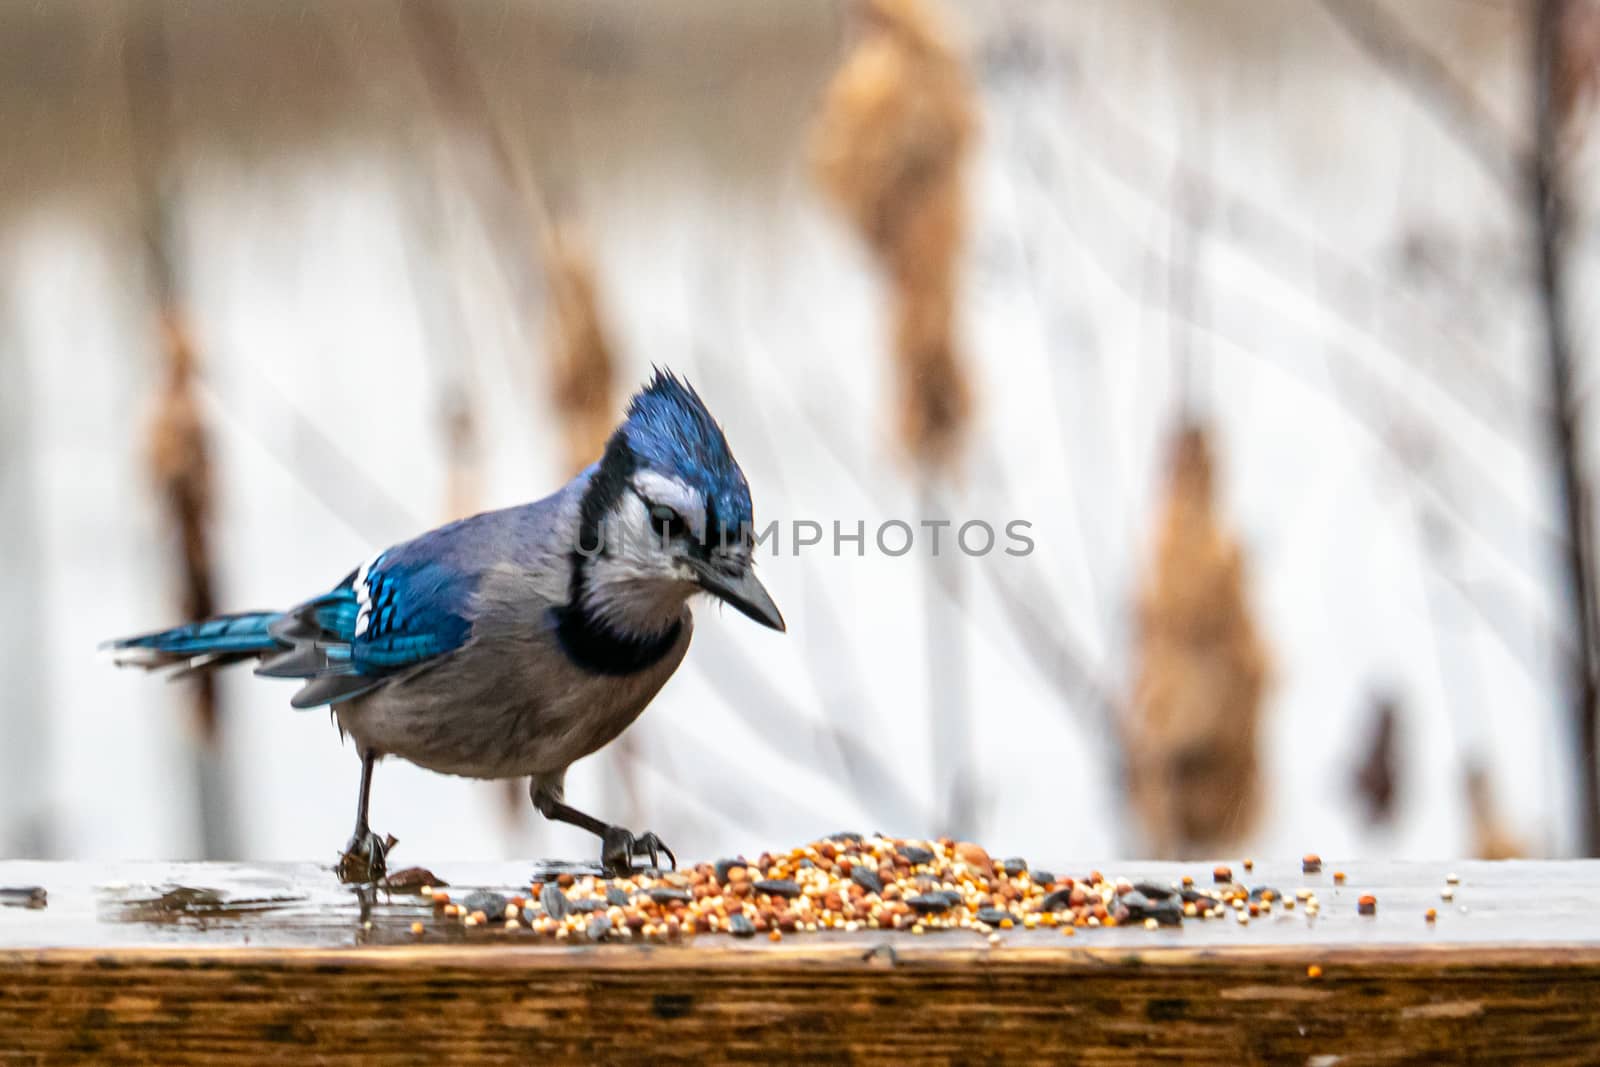 A wet blue jay in rainy weather inspects birdseed that has been spilled out in a small pile on a wooden railing. The seeds were left at a popular birdwatching spot.